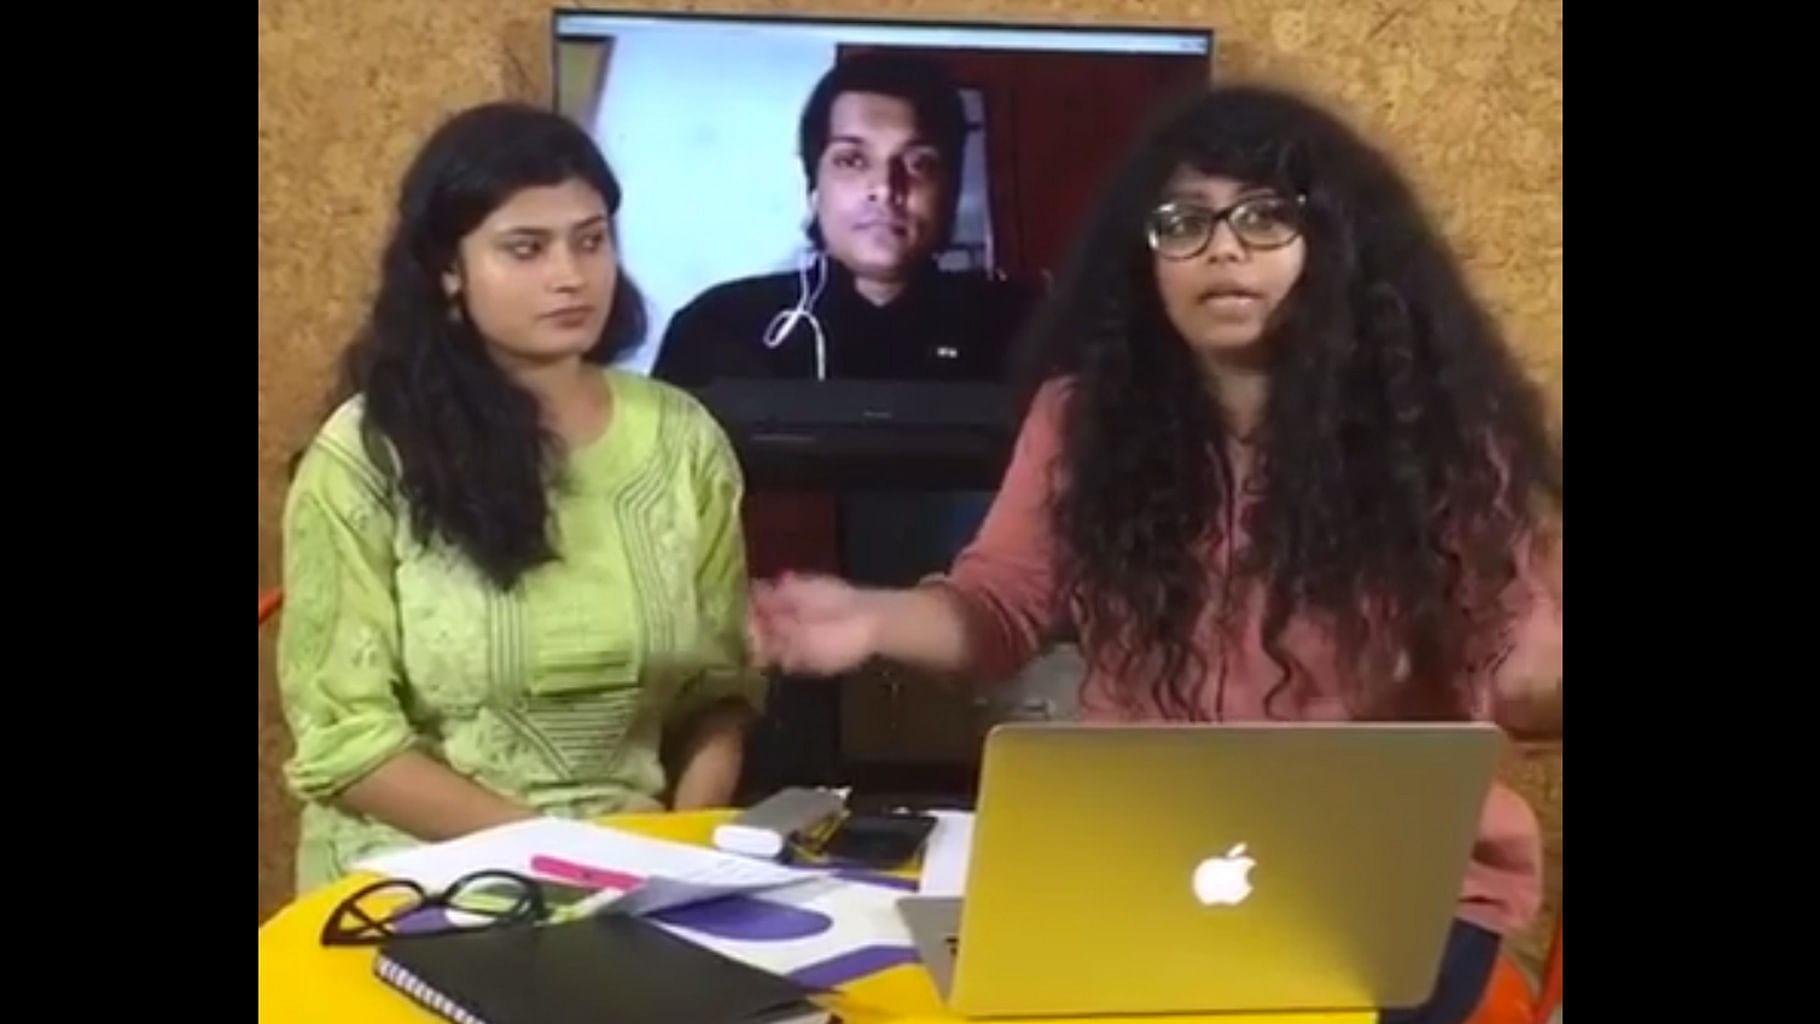 Nishtha Gautam, gender equality activist and columnist and Rahul Easwar, author and activist in discussion with <b>The Quint</b>. (Photo: <b>The Quint</b>)